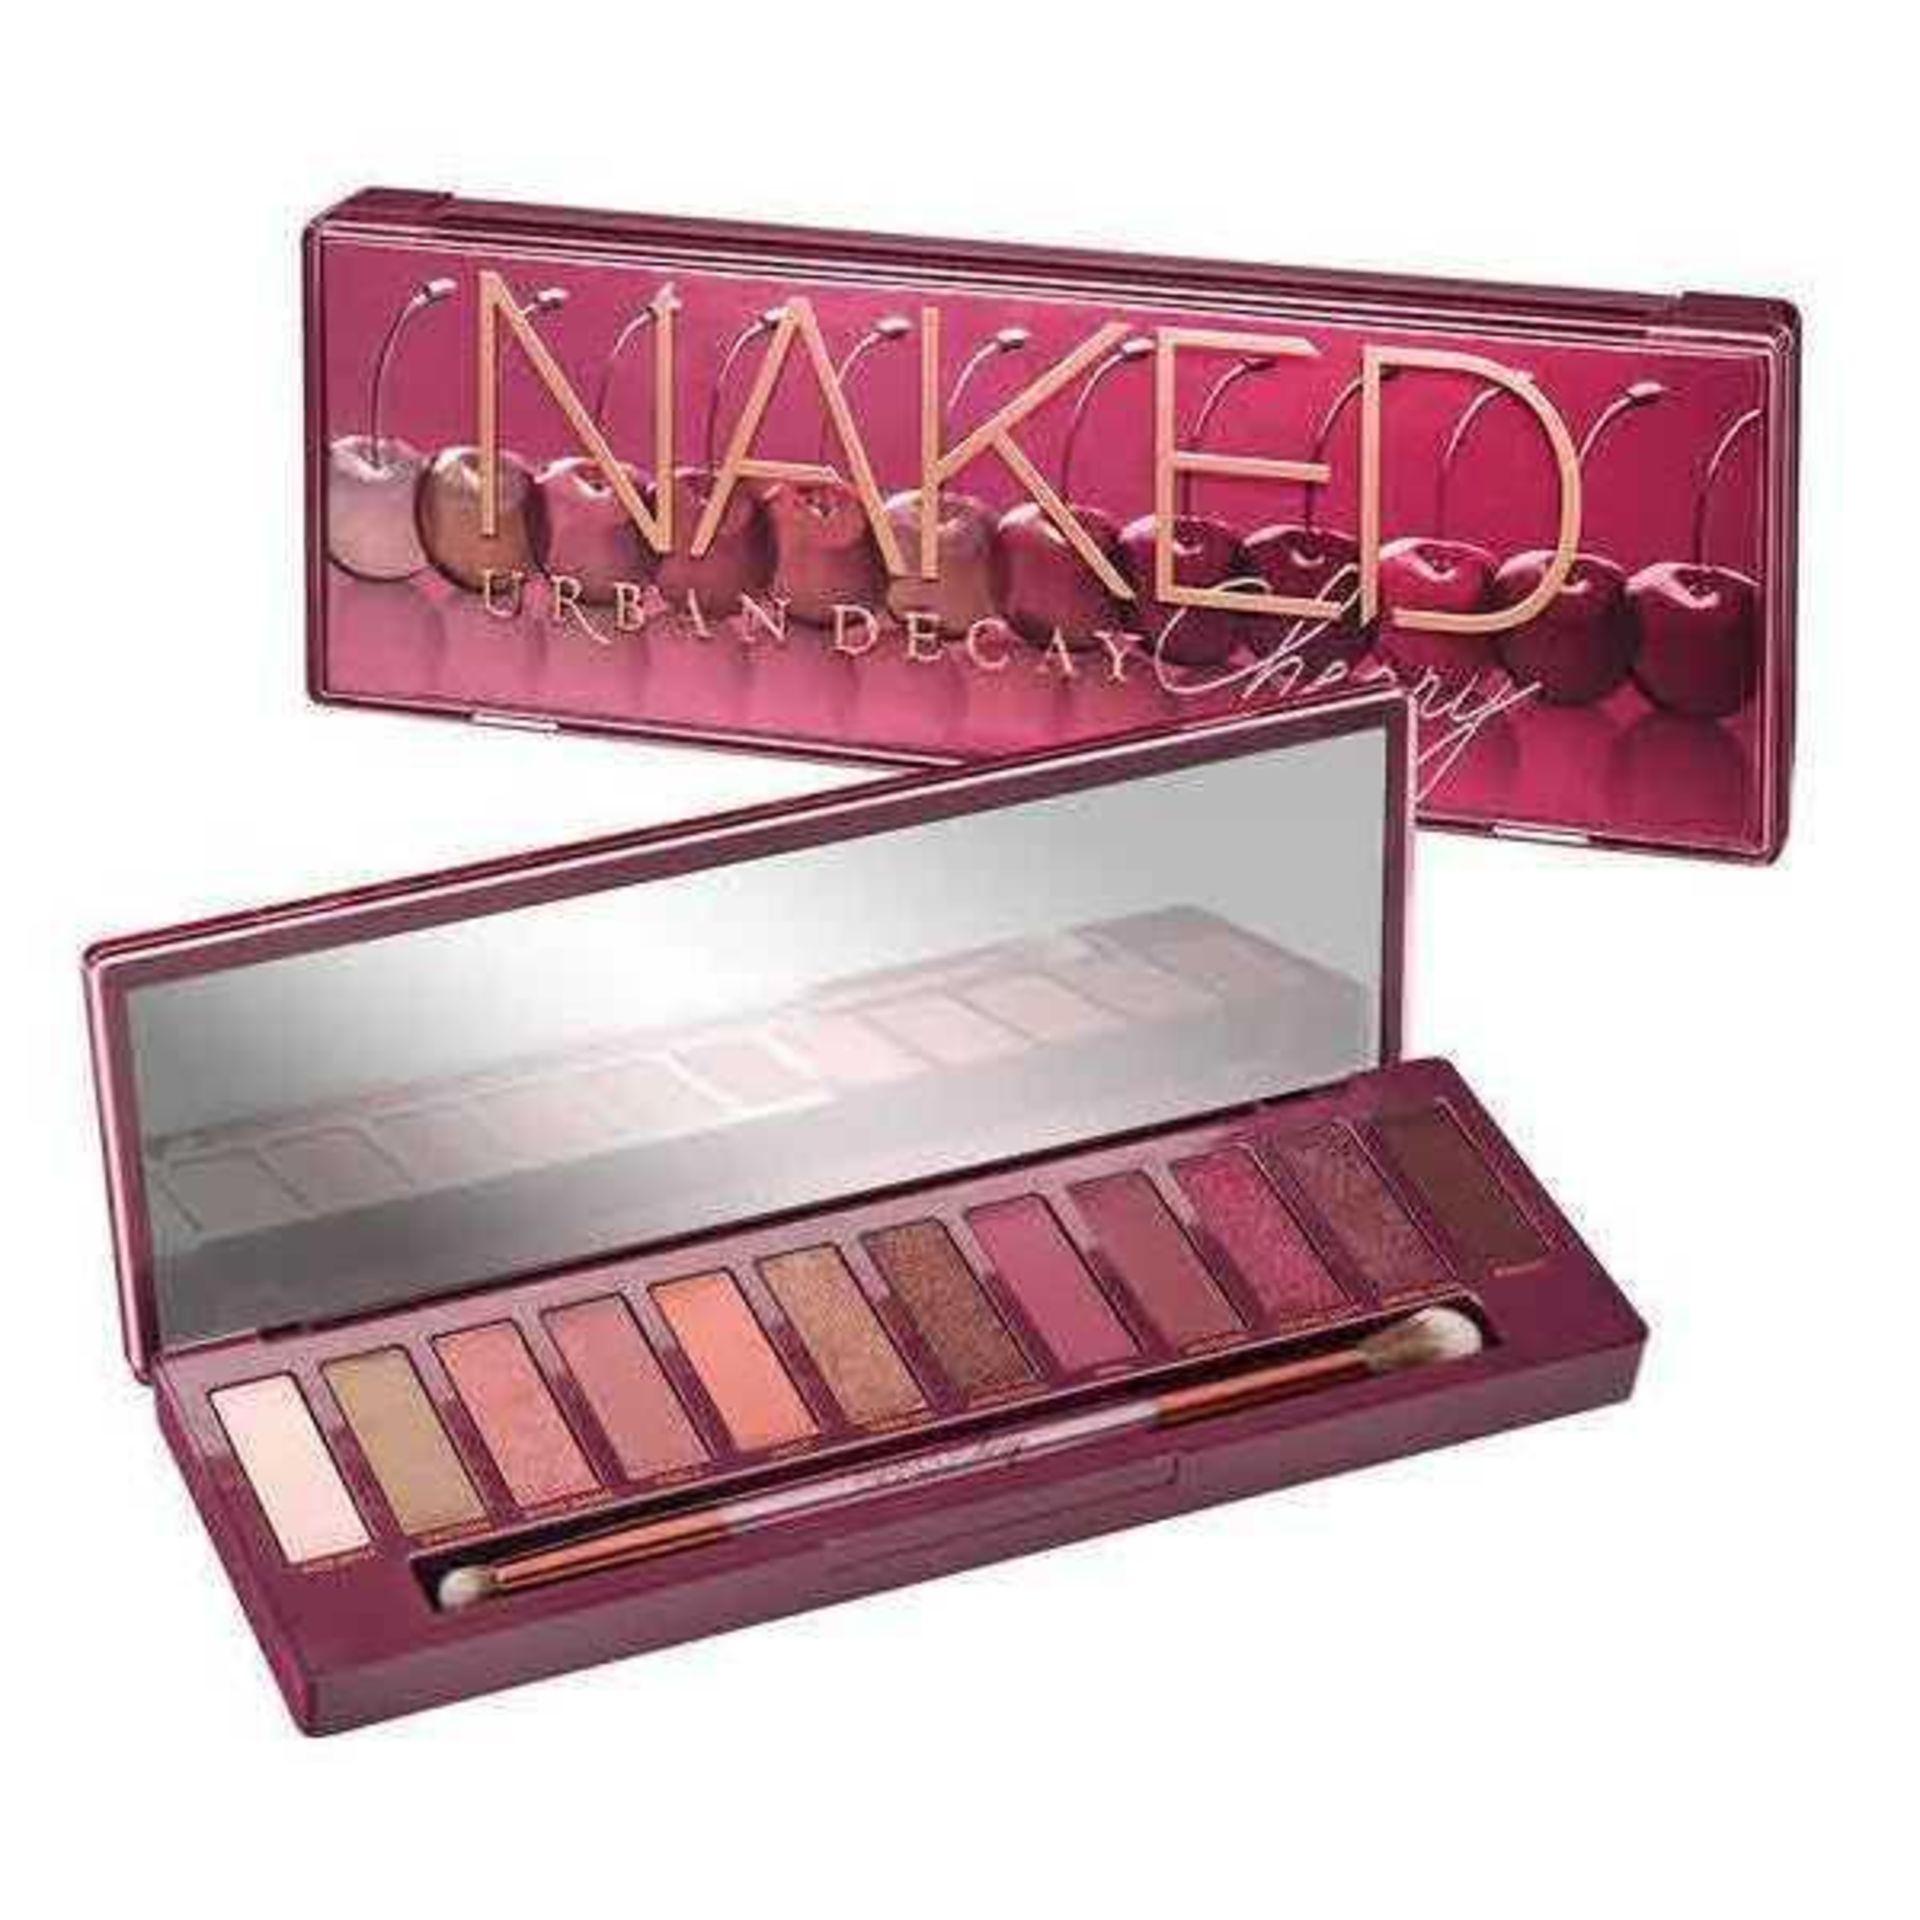 Rrp £50 Boxed Naked Urban Decay Cherry Pallete